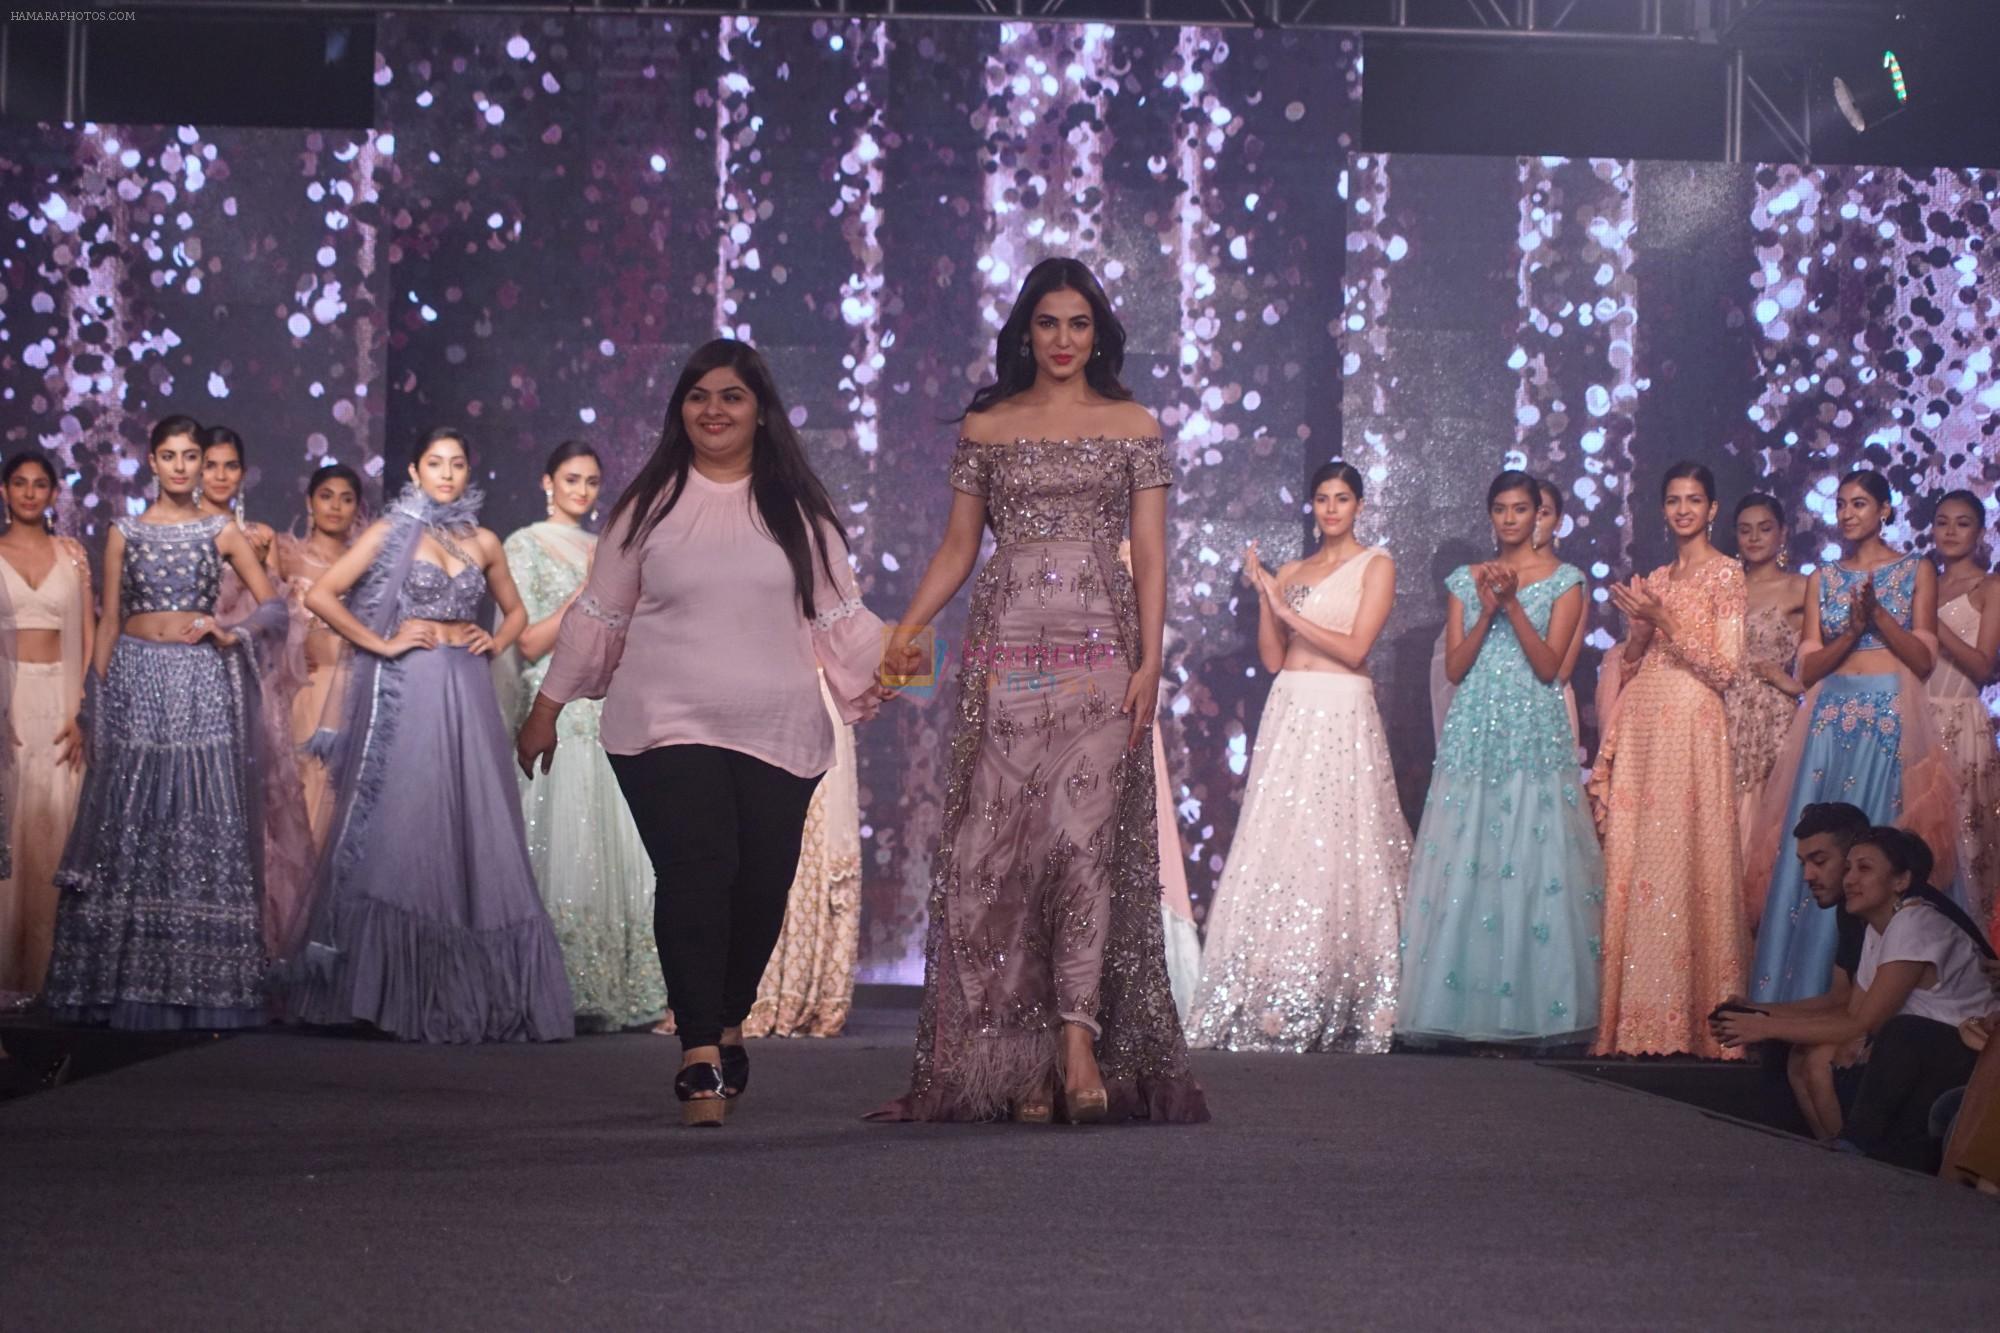 Sonal Chauhan Walk The Ramp As ShowStopper For Designer Sneha Parekh At The Wedding Junction Show on 28th Oct 2018